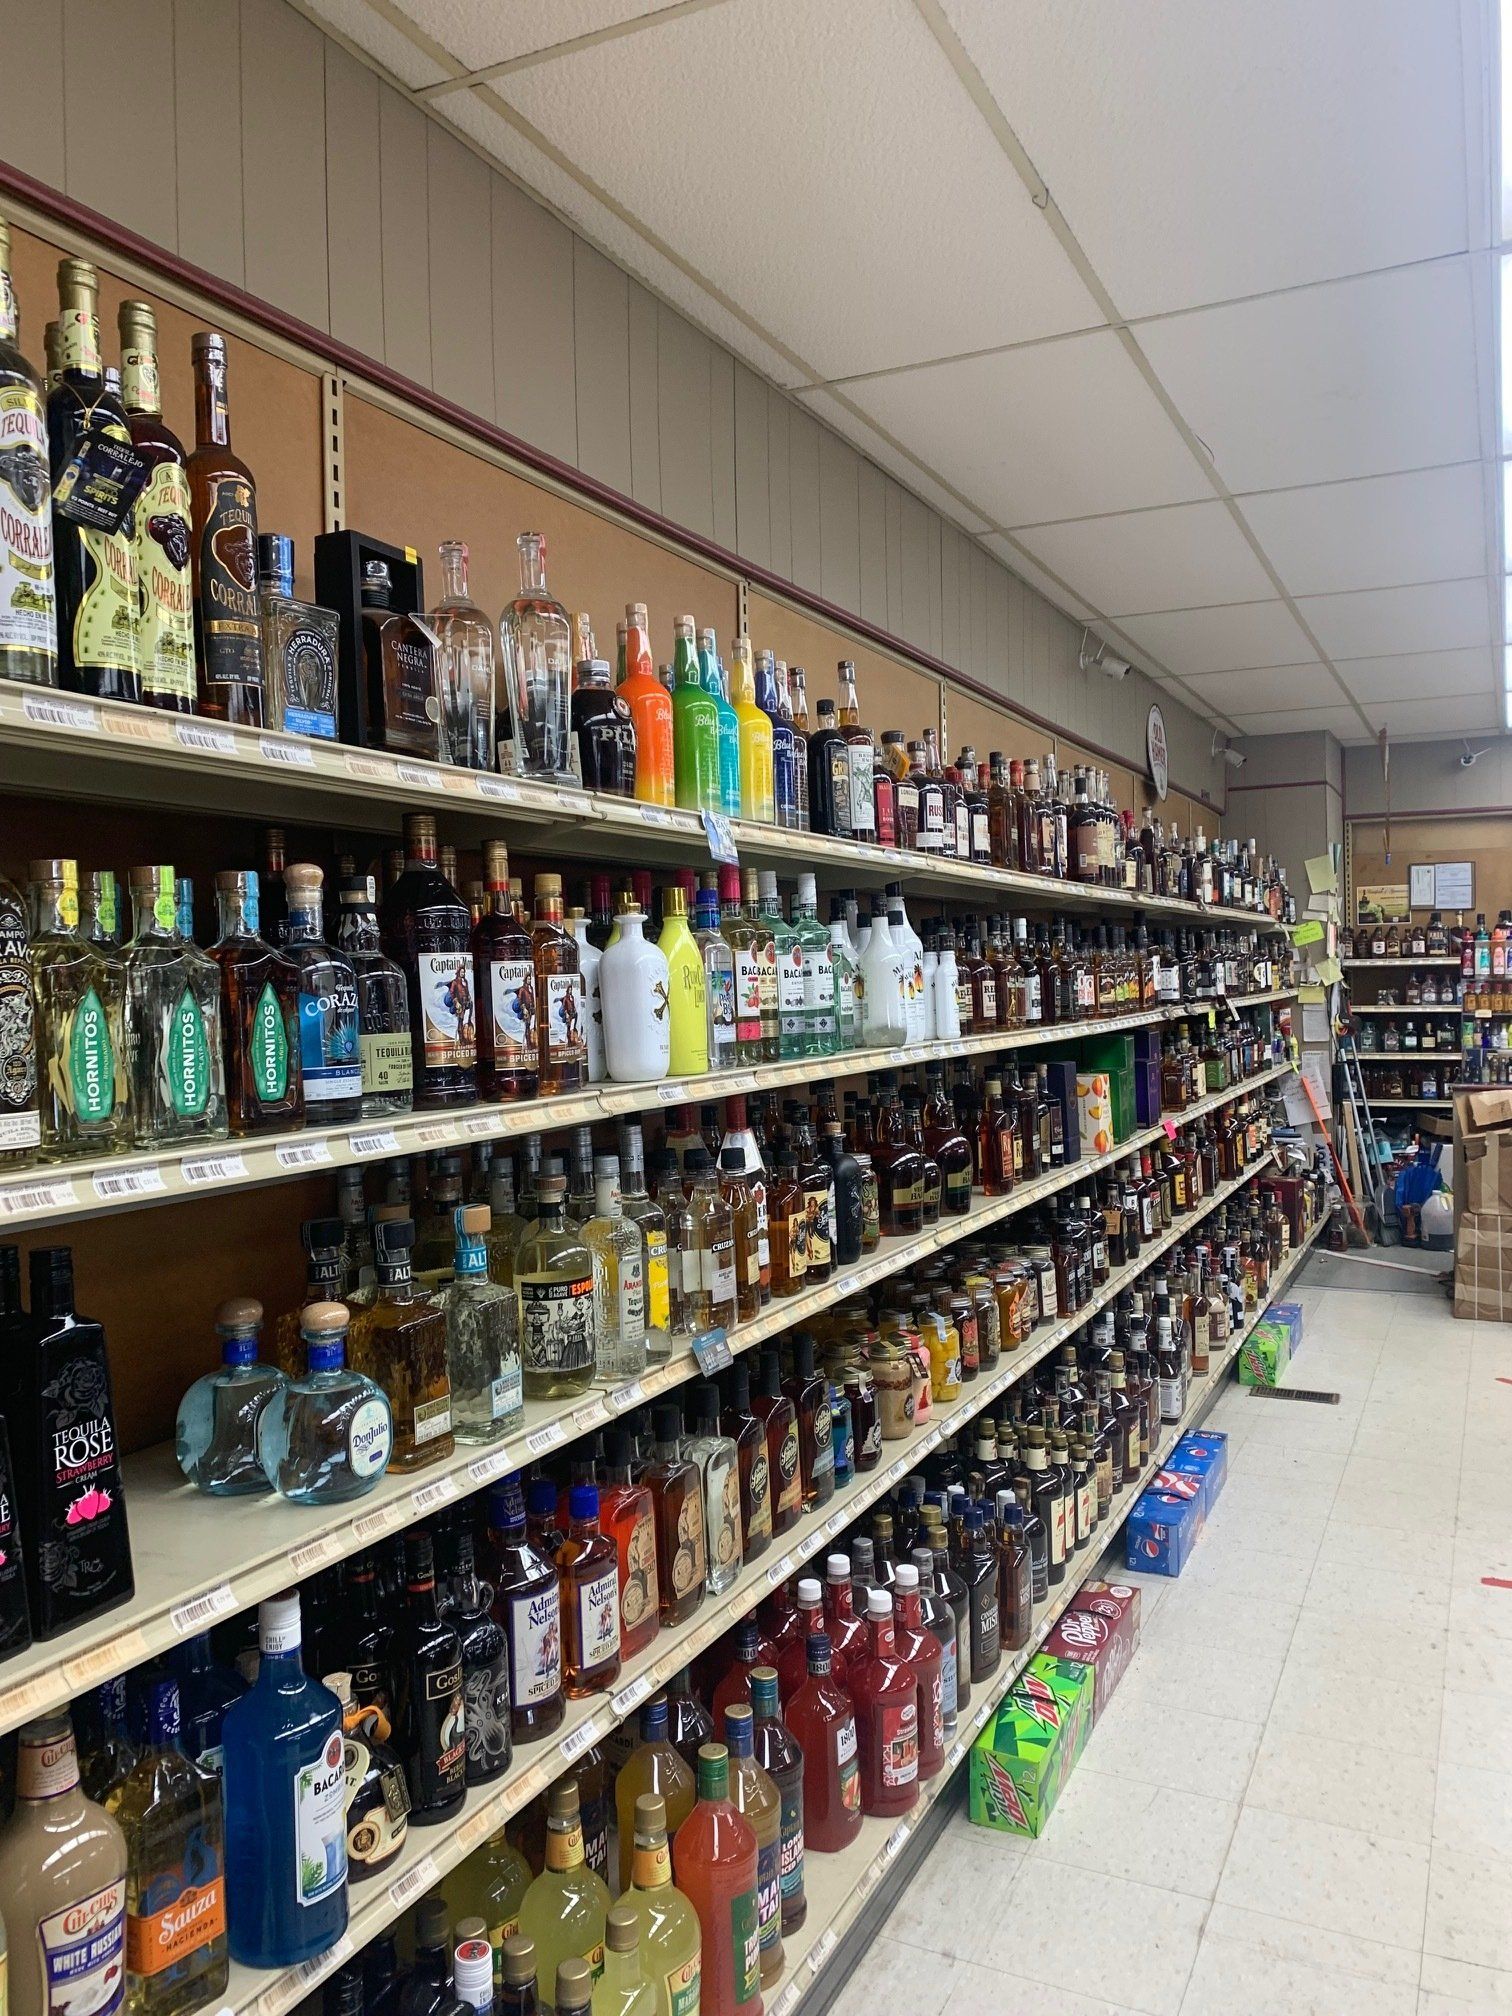 A liquor store filled with lots of bottles of liquor on shelves.